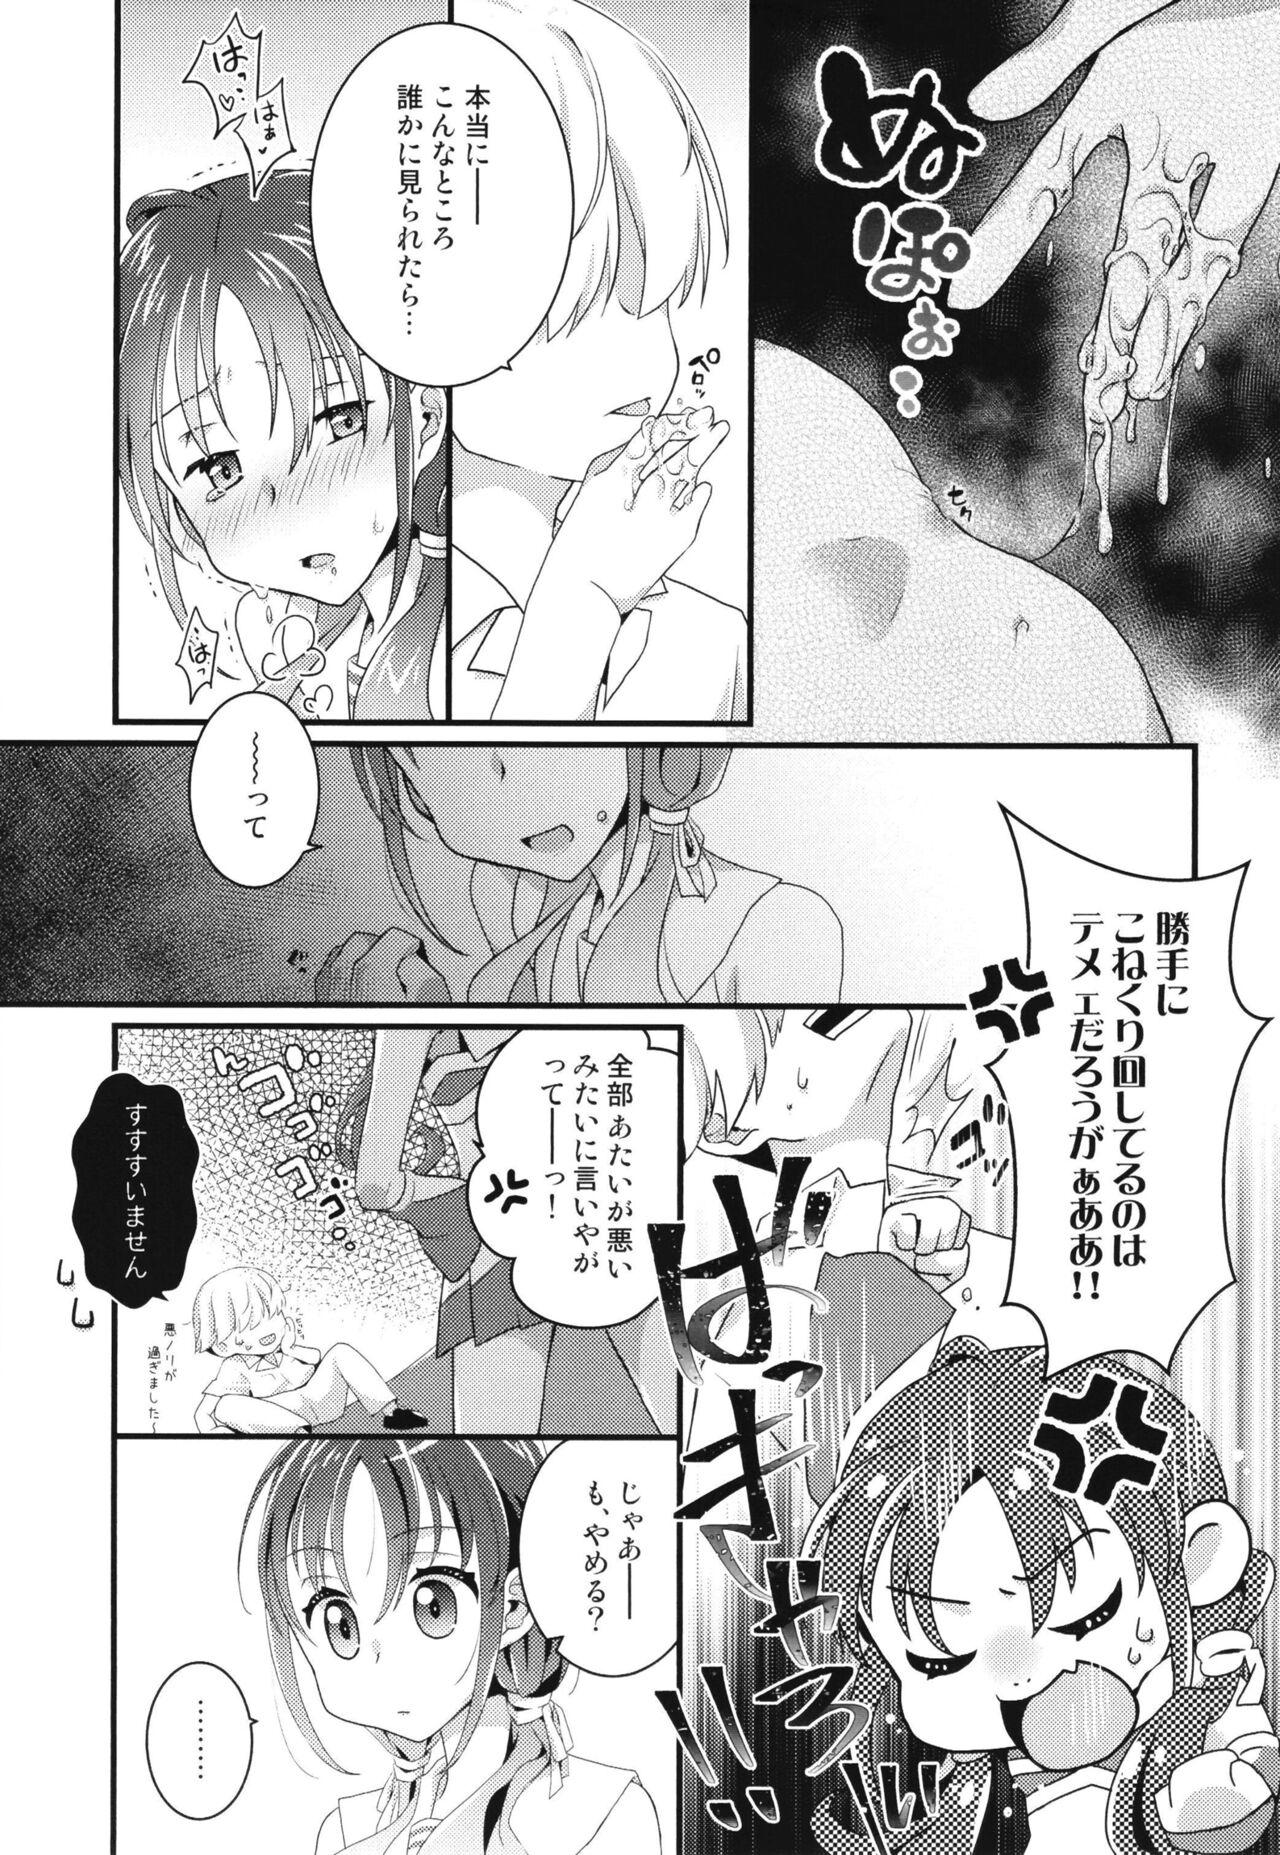 Firsttime Yah! Cheer! yeah! - Kantai collection Large - Page 7